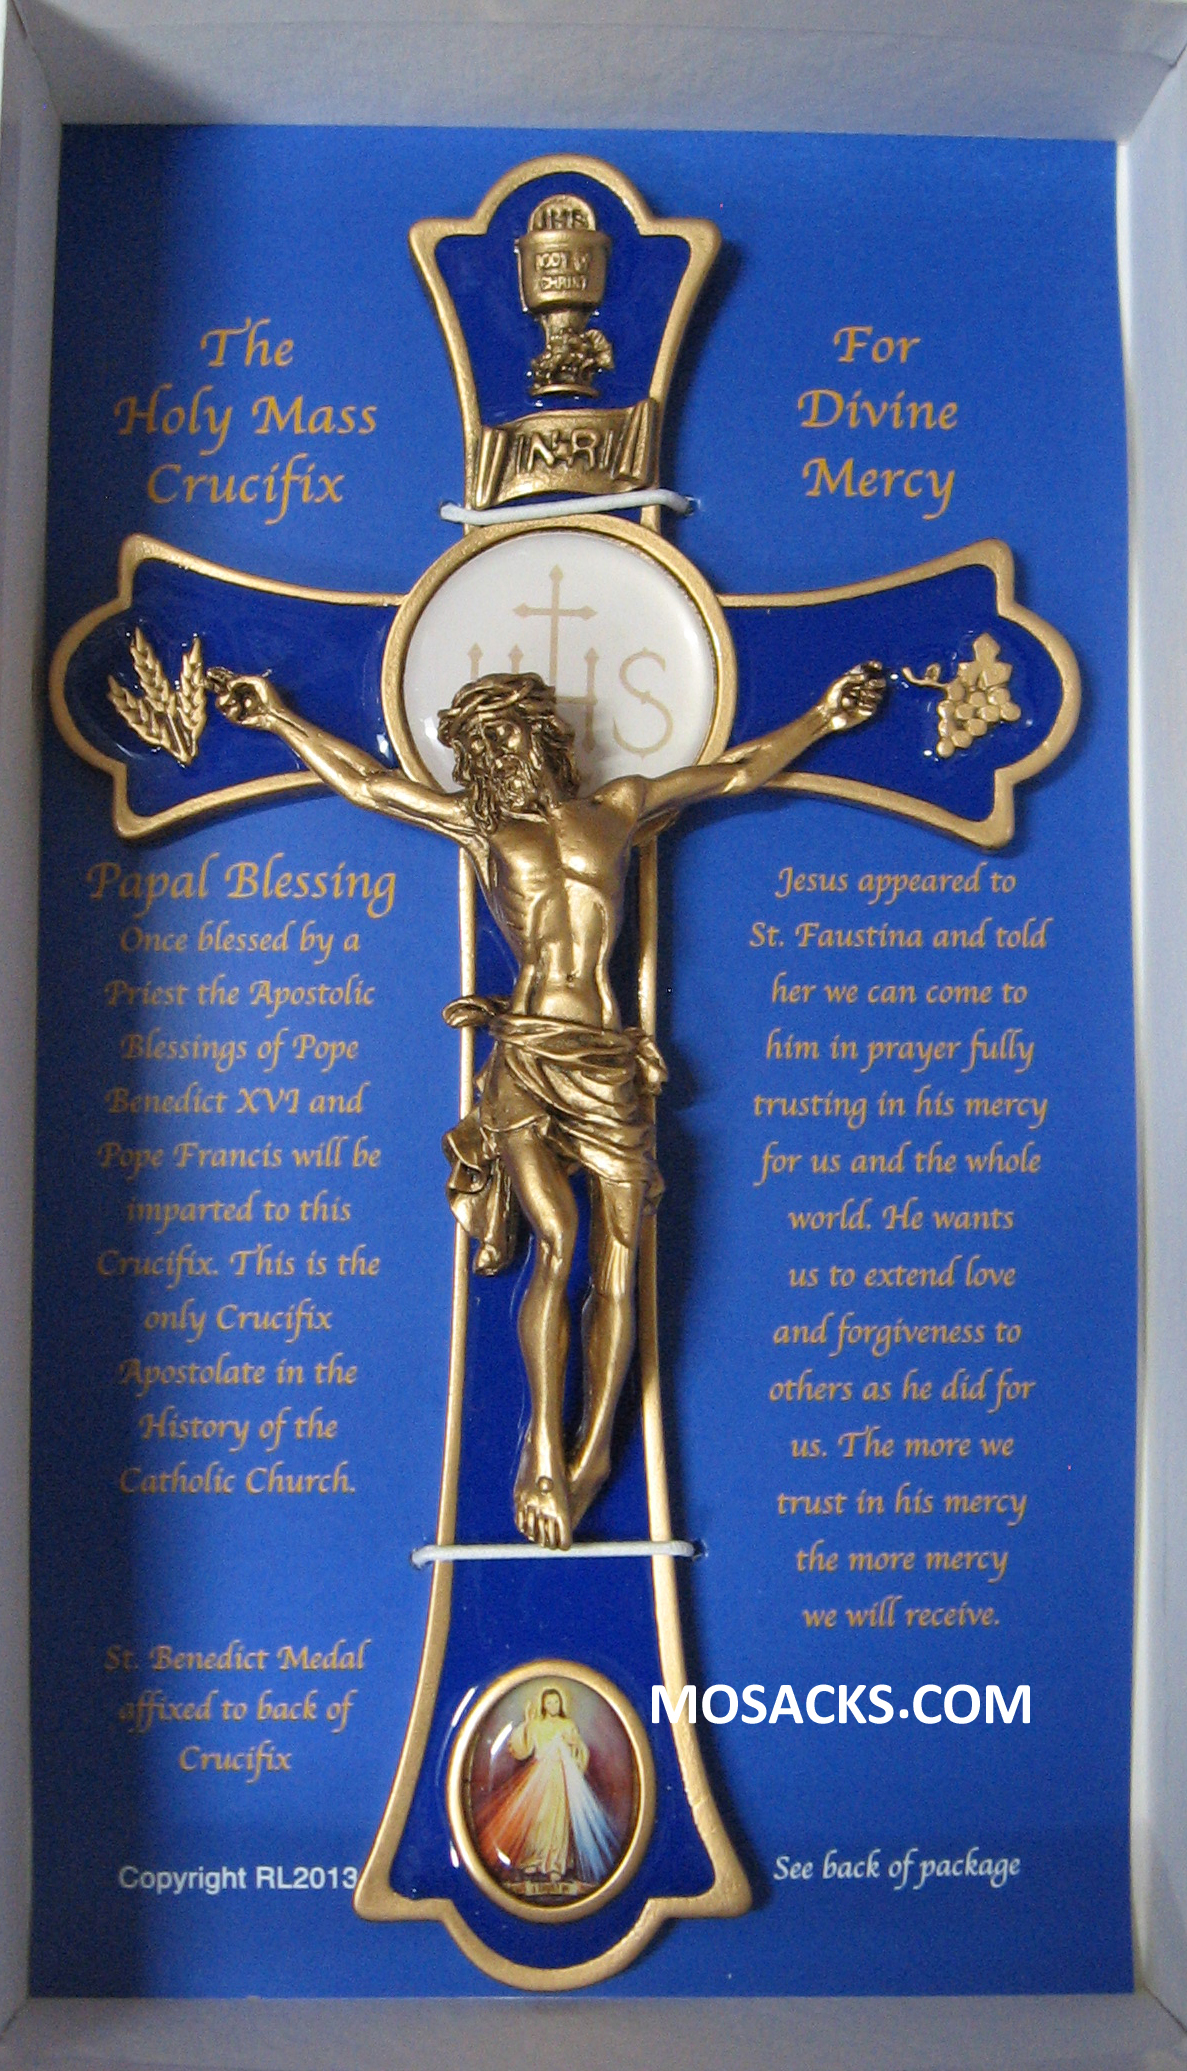 8" Holy Mass Crucifix with Divine Mercy Dome and Blue Epoxy inlay with Gold Finish Corpus-JC3230L is a wall crucifix.